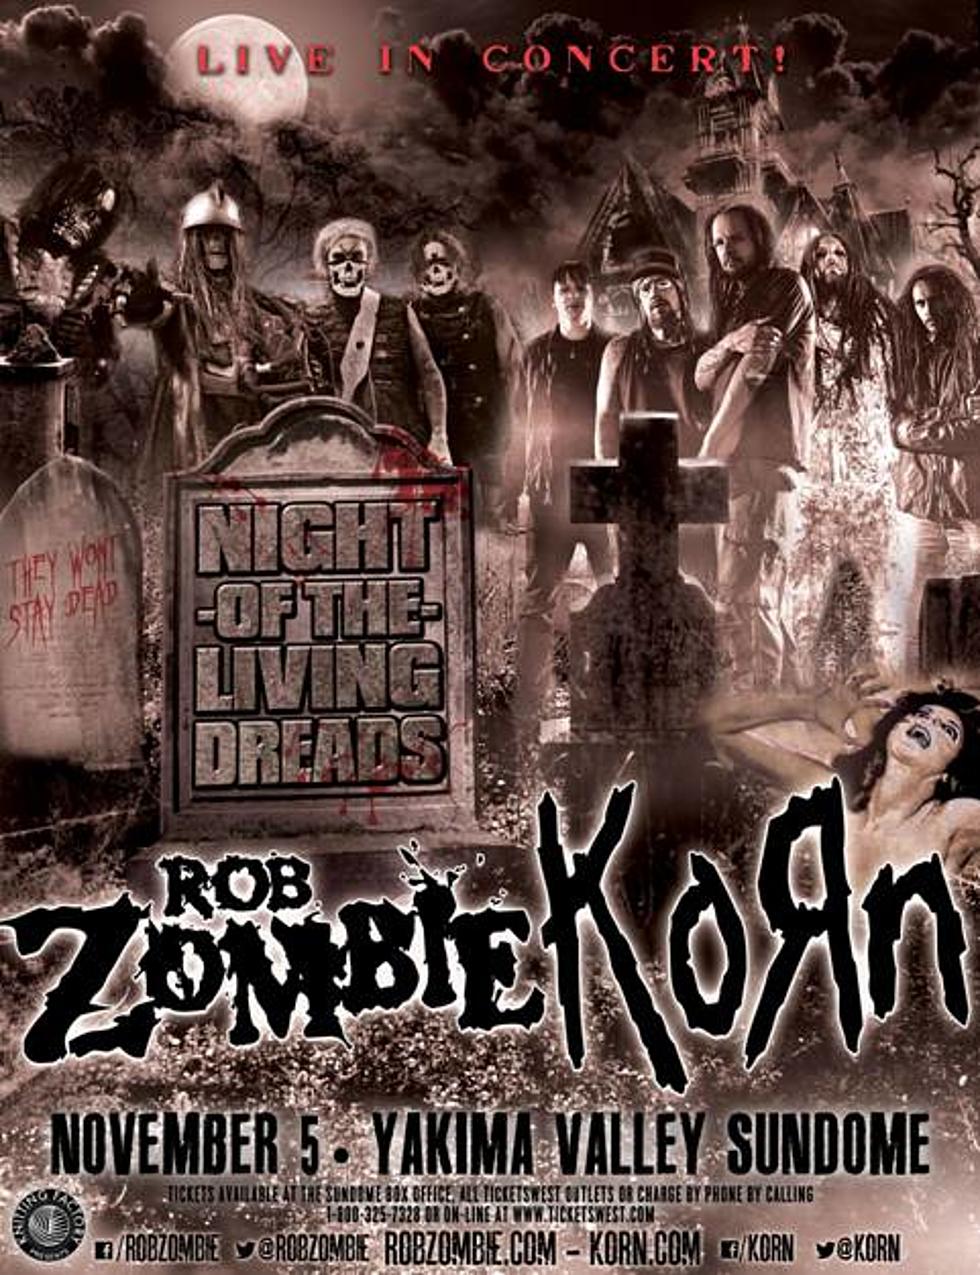 &#8216;Night Of The Living Dreads&#8217; Tour, Rob Zombie and Korn Live At The Sundome!